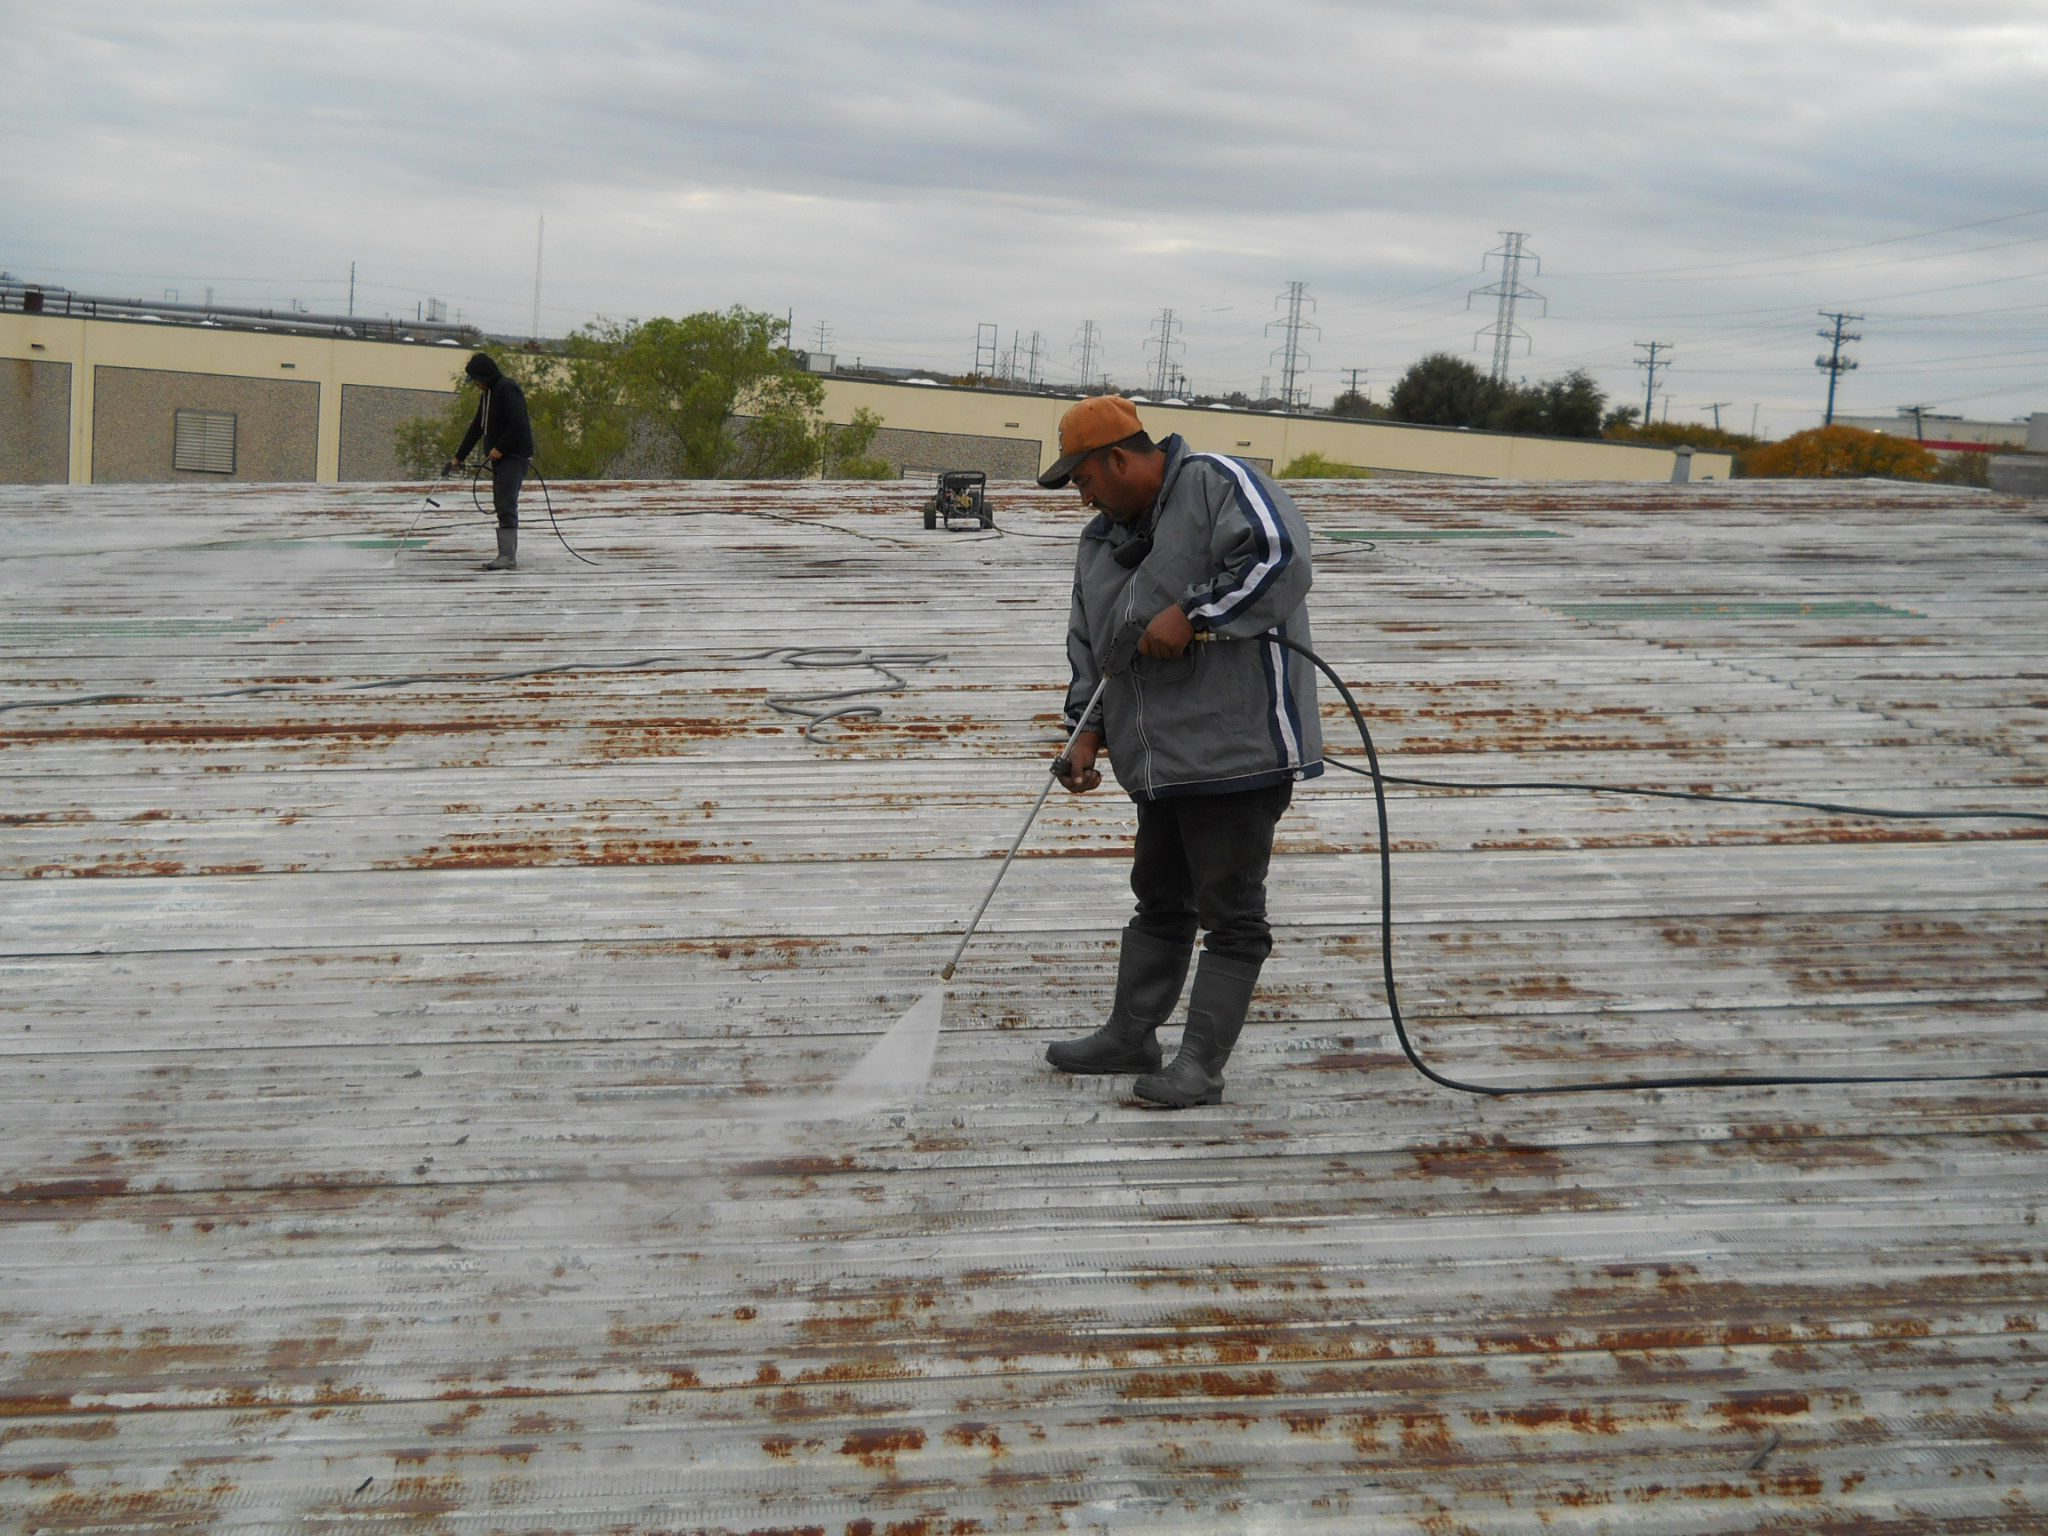 Metal Roof Coating being Installed - Nelson Roofing Company